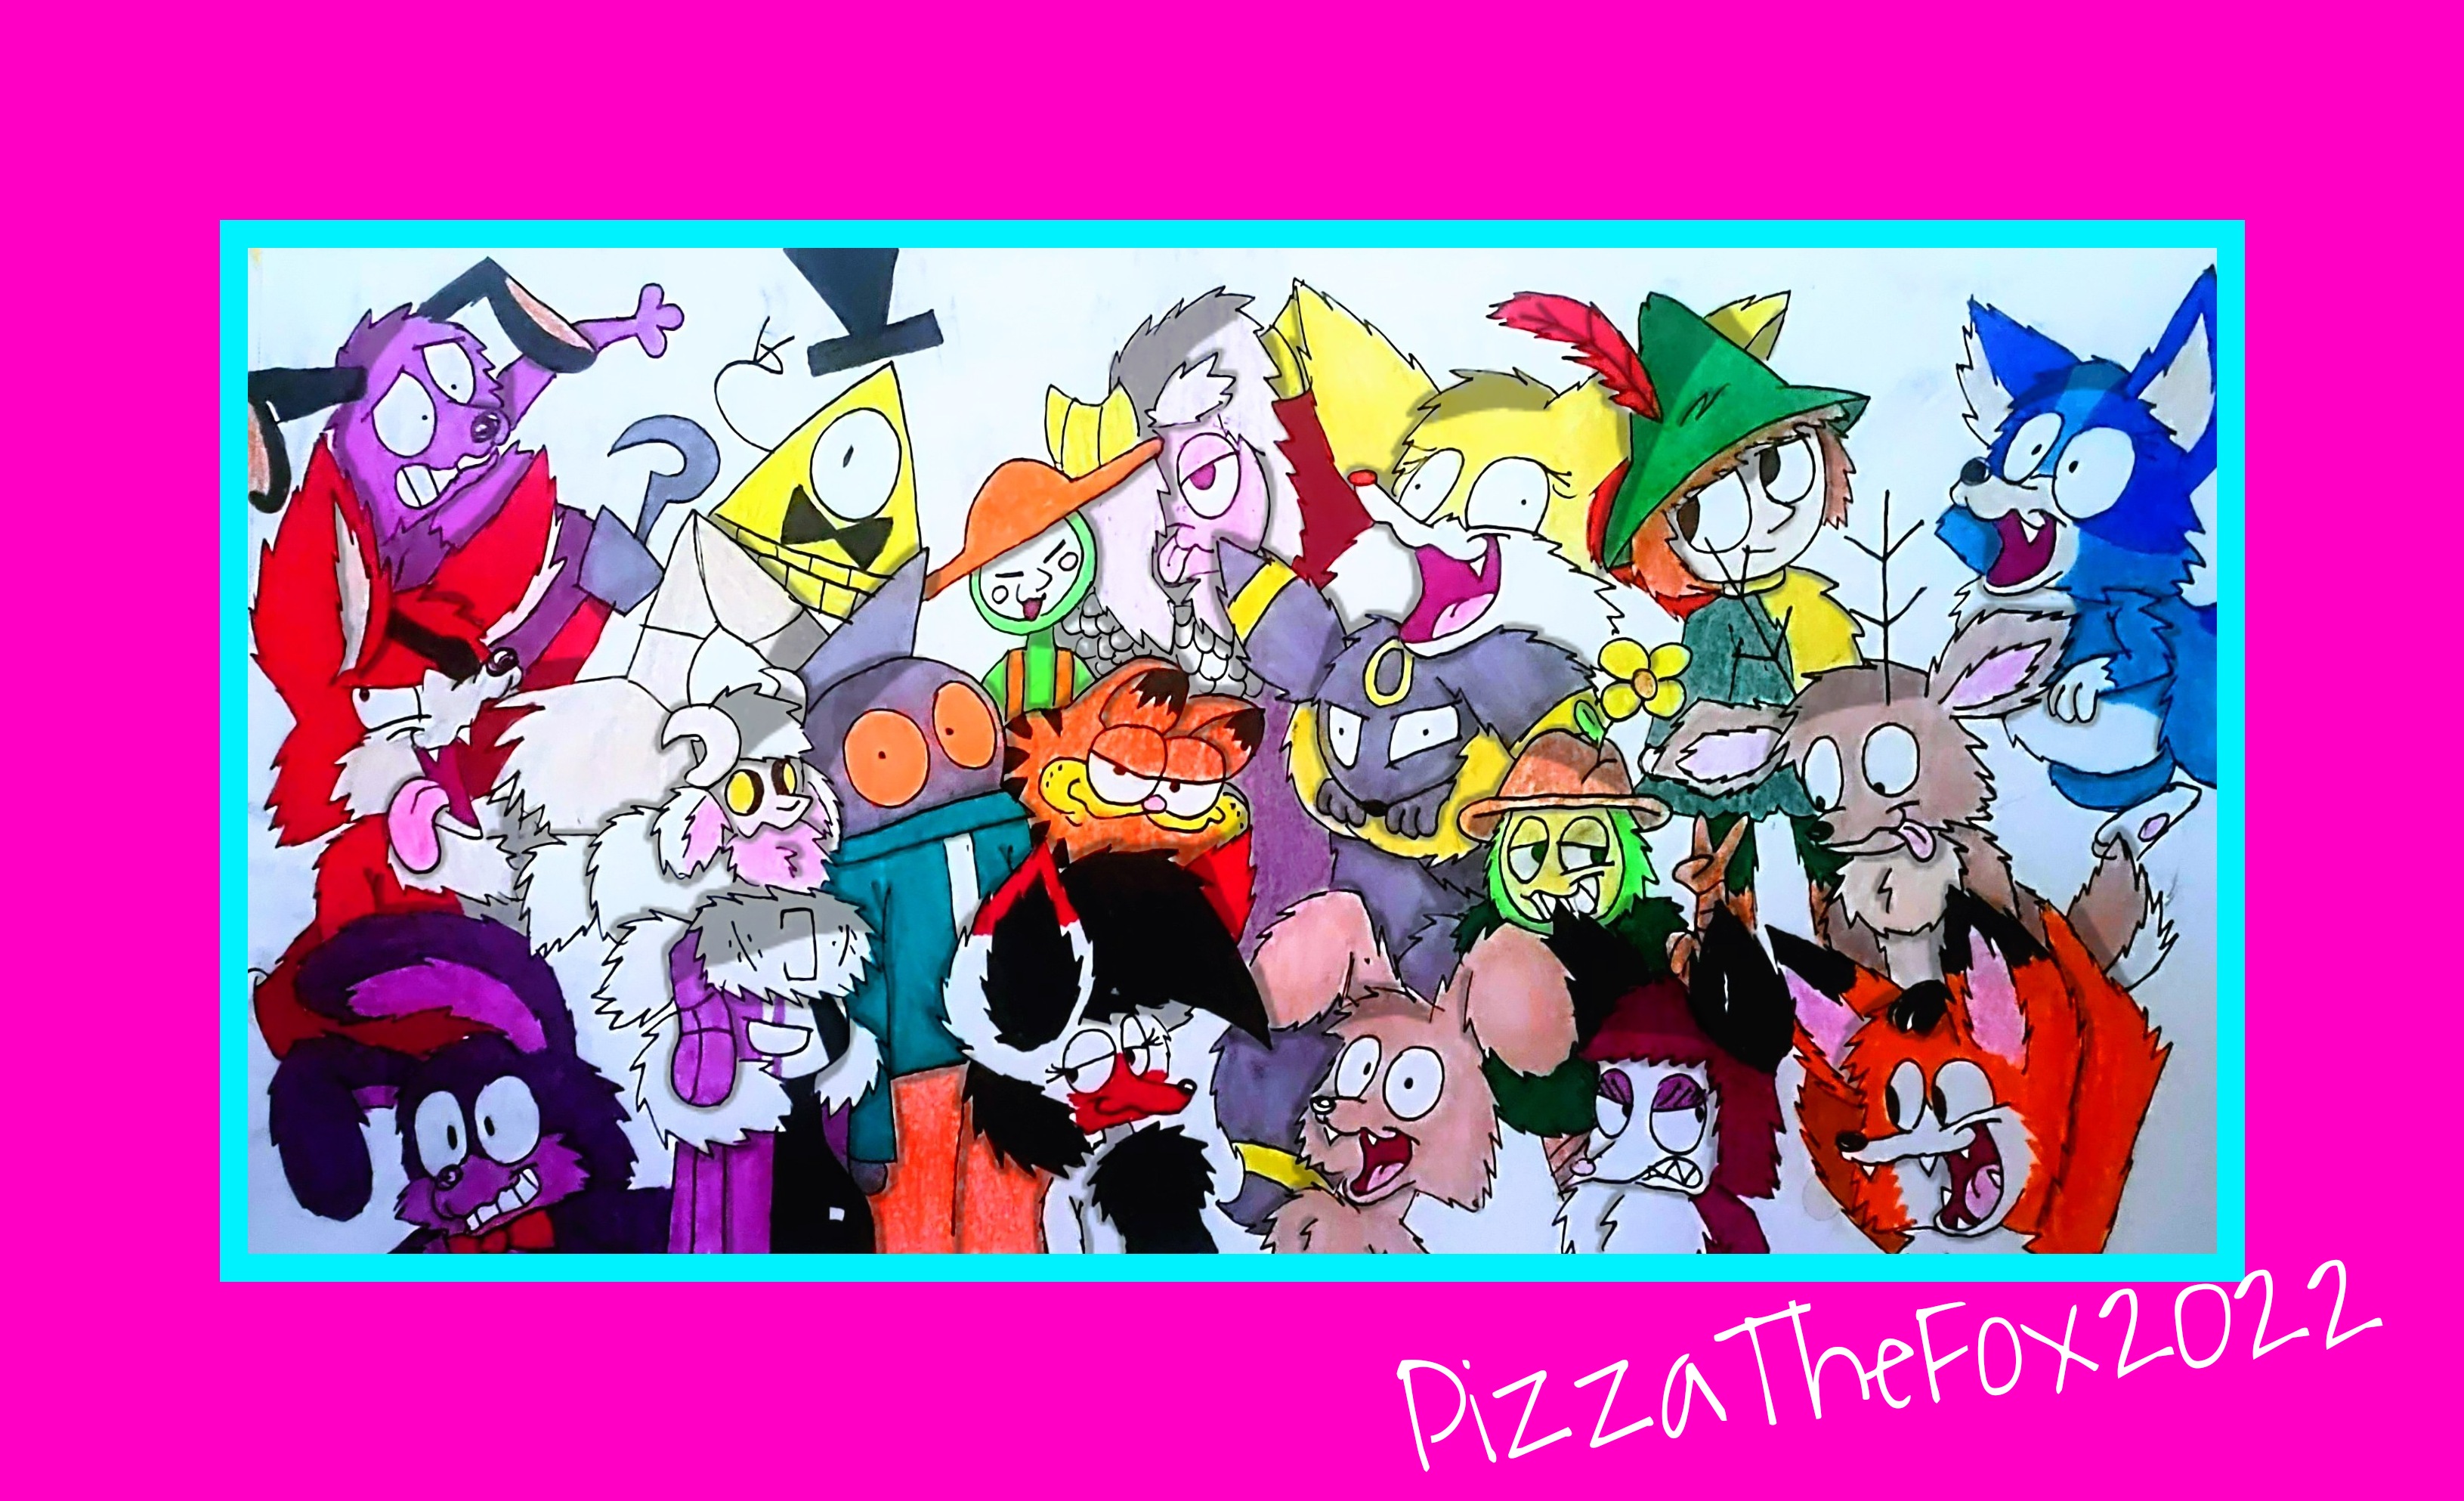 Pizza Tower characters collage by LunariaRide20 on DeviantArt